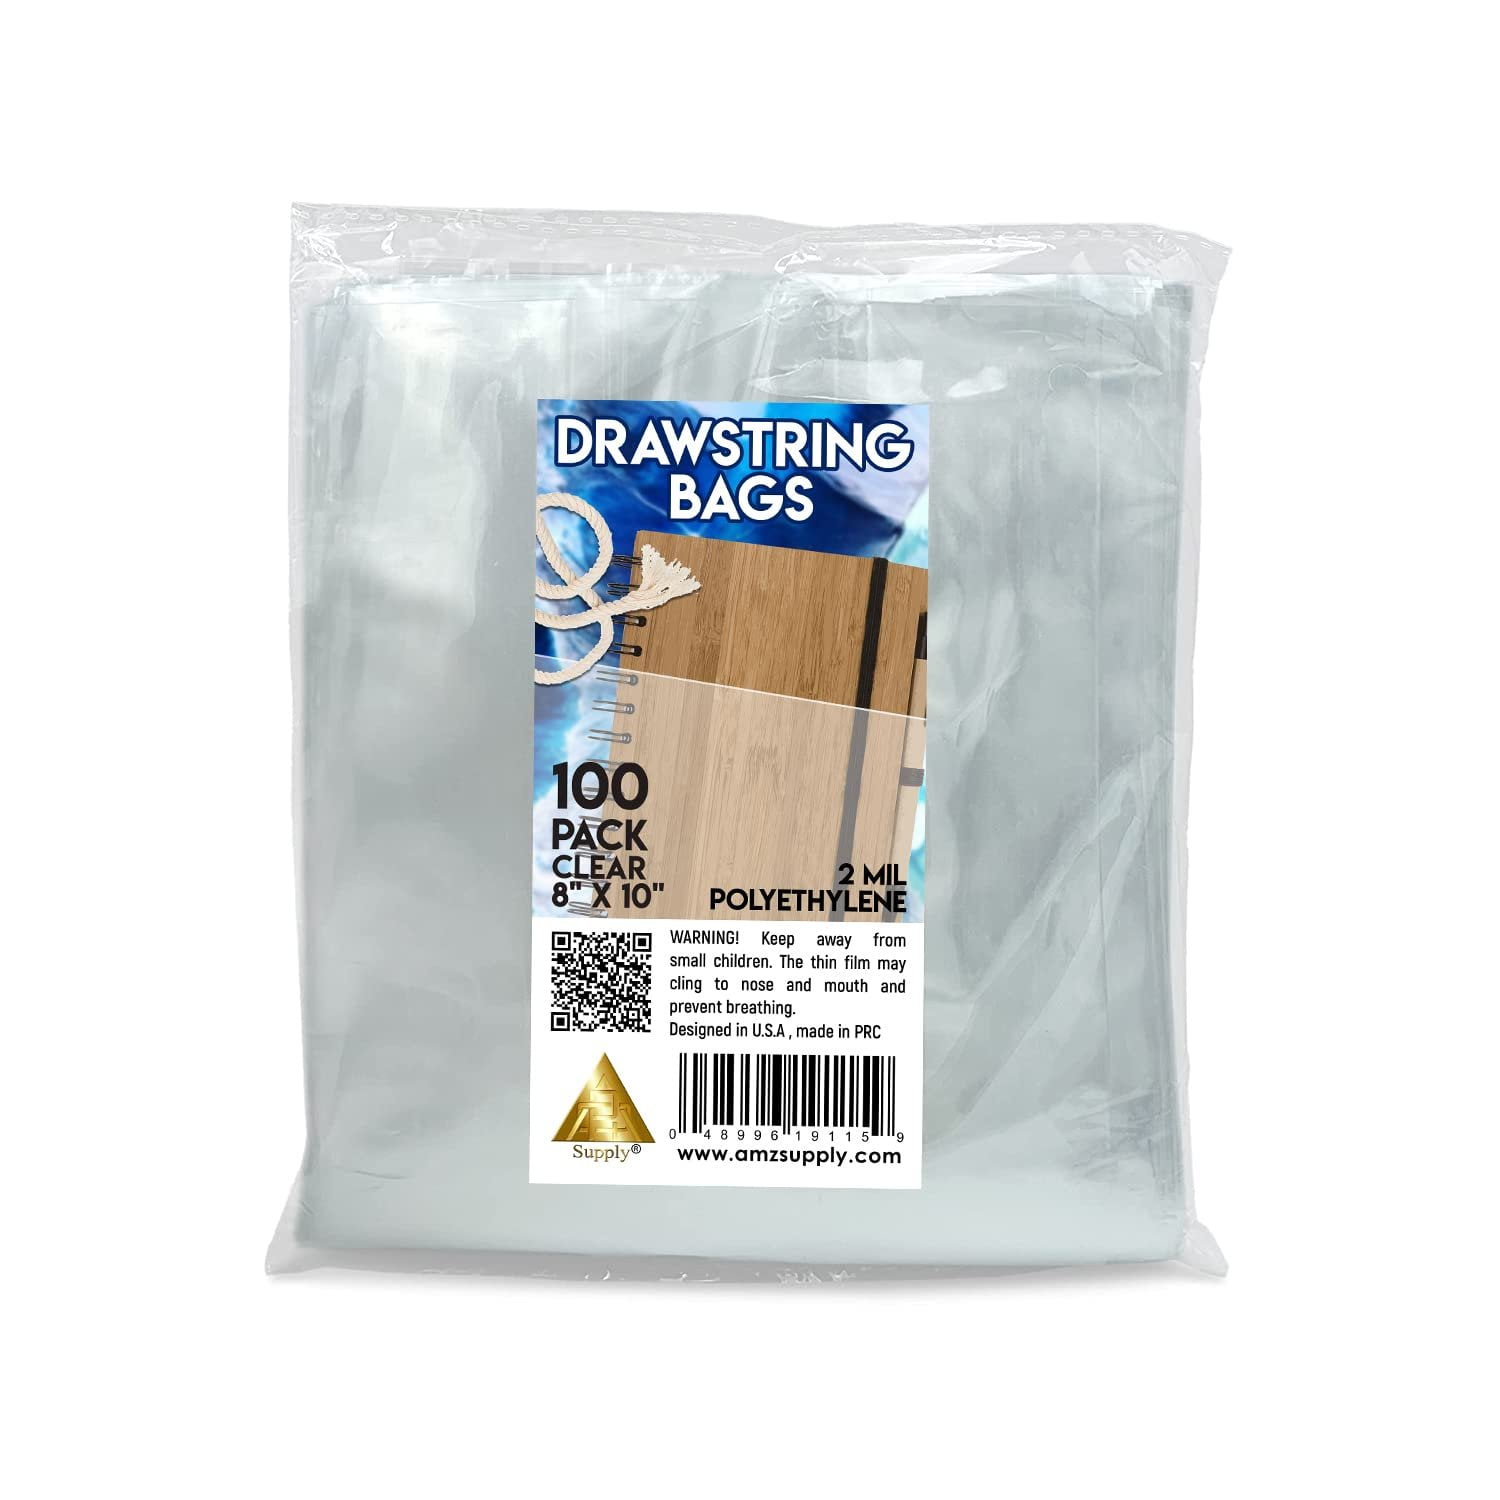 APQ Pack of 100 Clear Drawstring Bags 8 x 10 Thickness 2 mil Plastic Bags for Packing and Storing Ideal for Industrial and Business Applications. Double Cotton Drawstrings Polyethylene Bags 8x10 